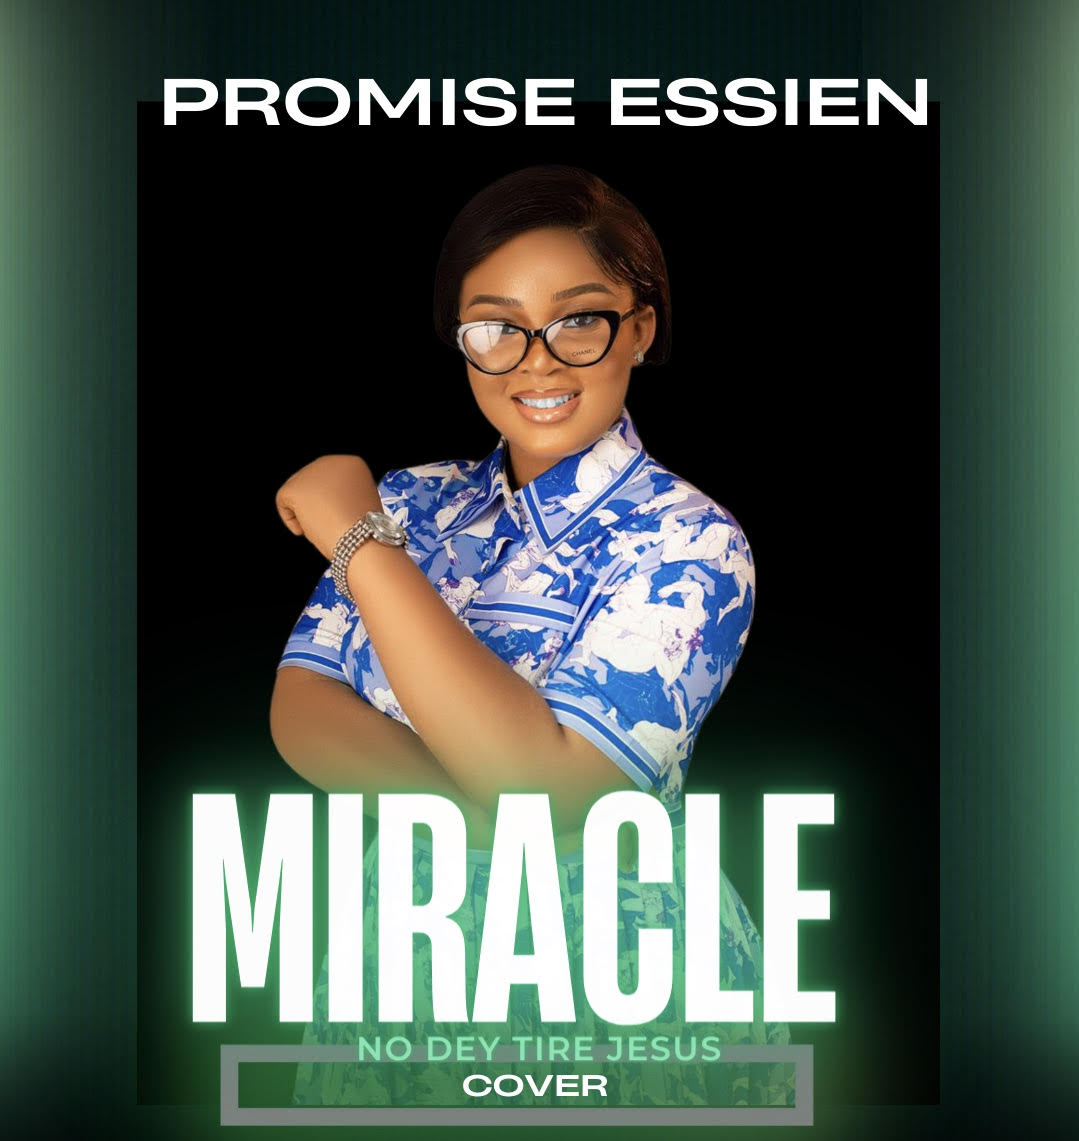 VIDEO: Promise Essien - Miracle No Dey Tire Jesus (Cover)